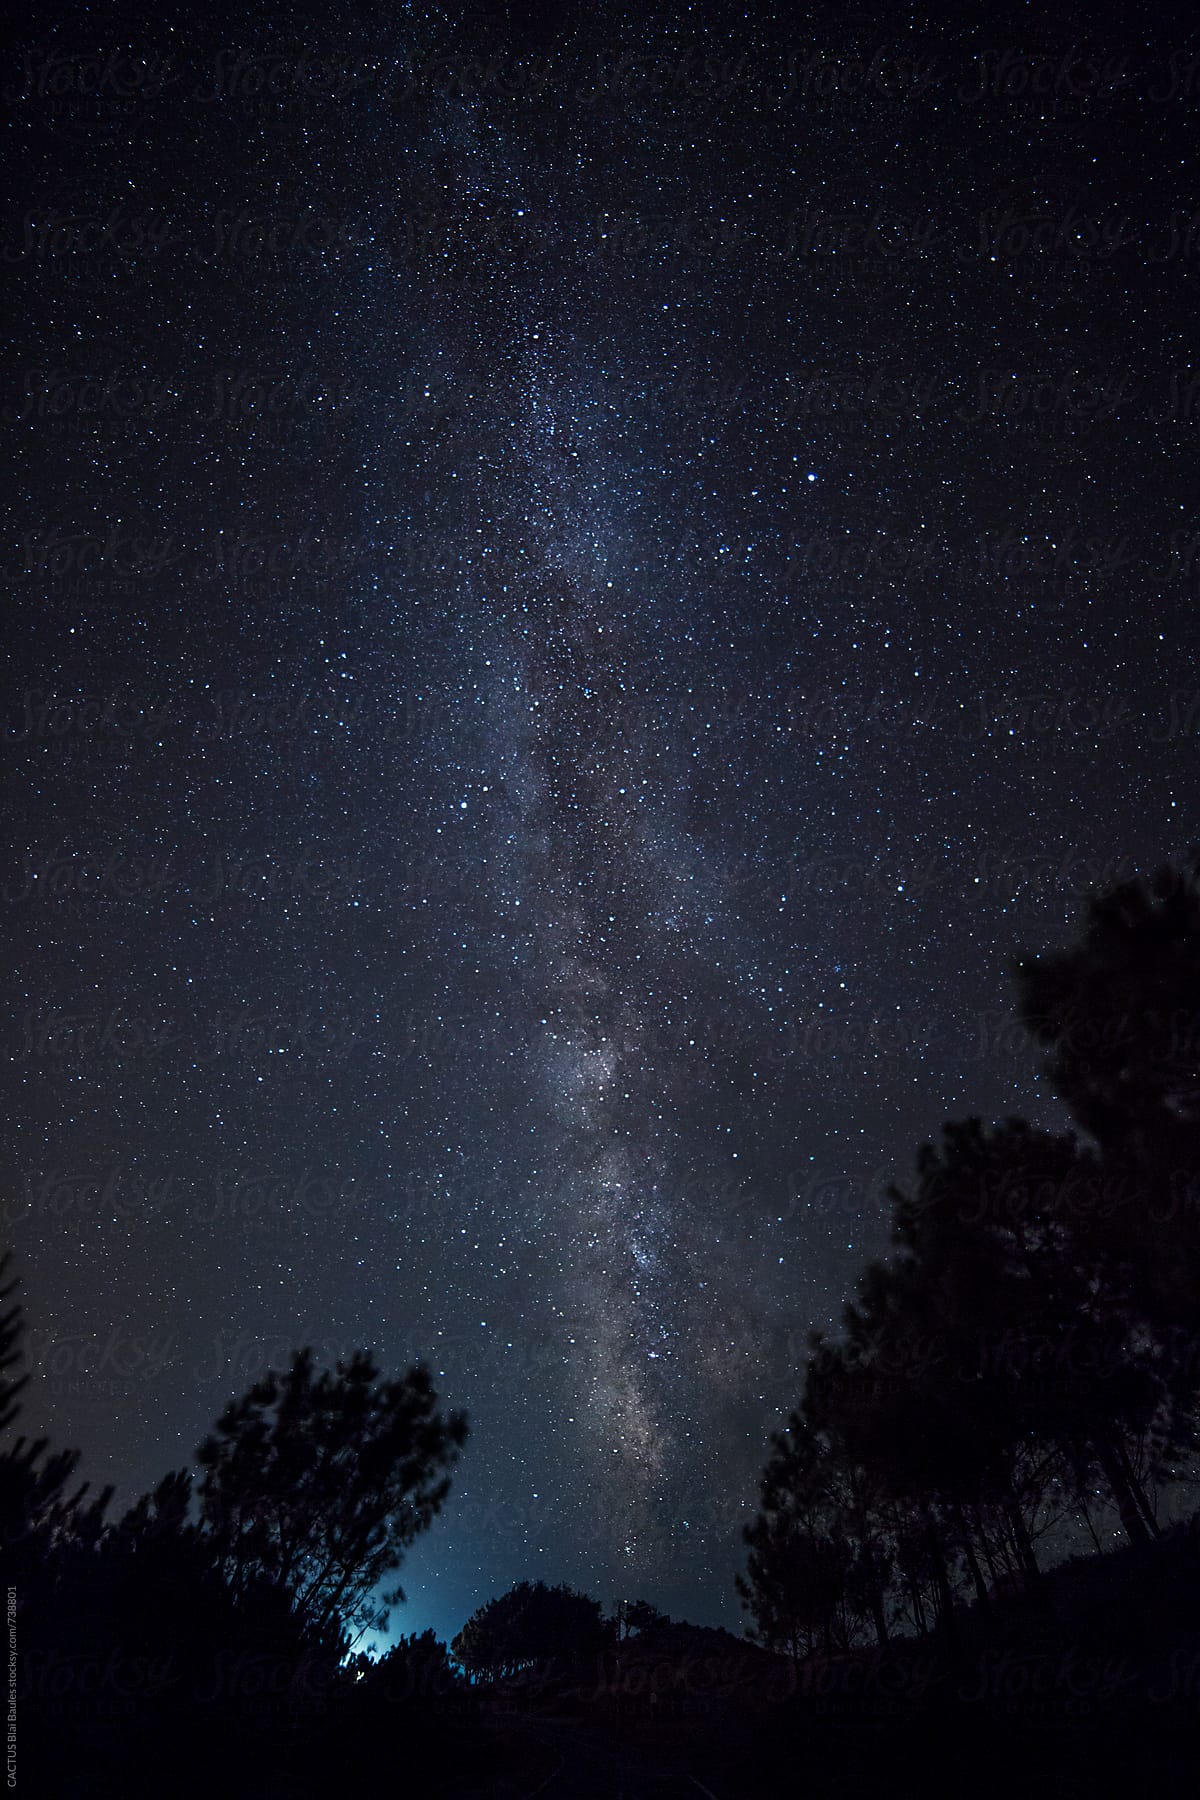 Milky way view during a crear night